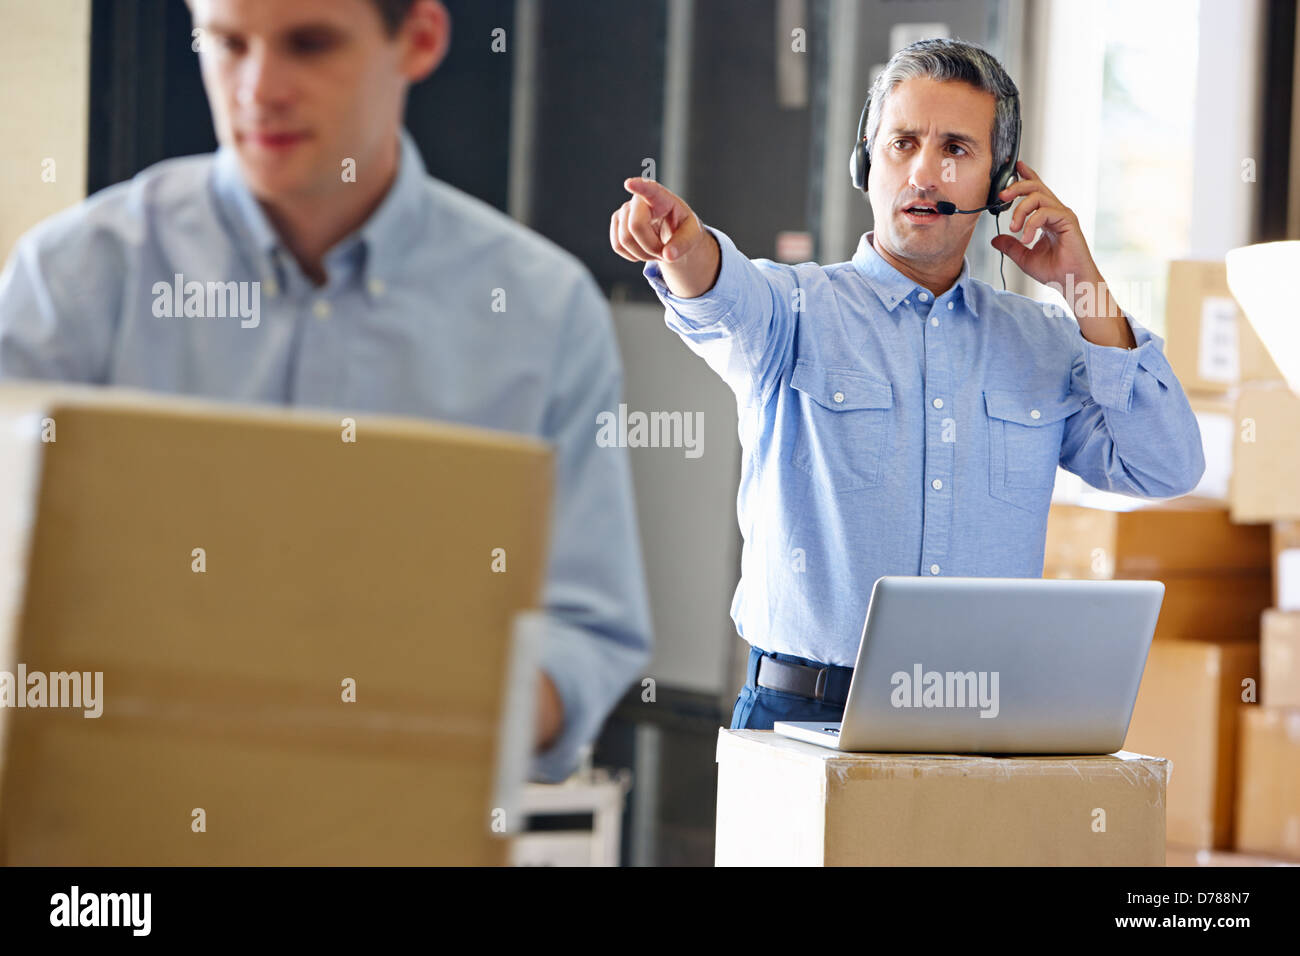 Manager Using Headset In Distribution Warehouse Stock Photo